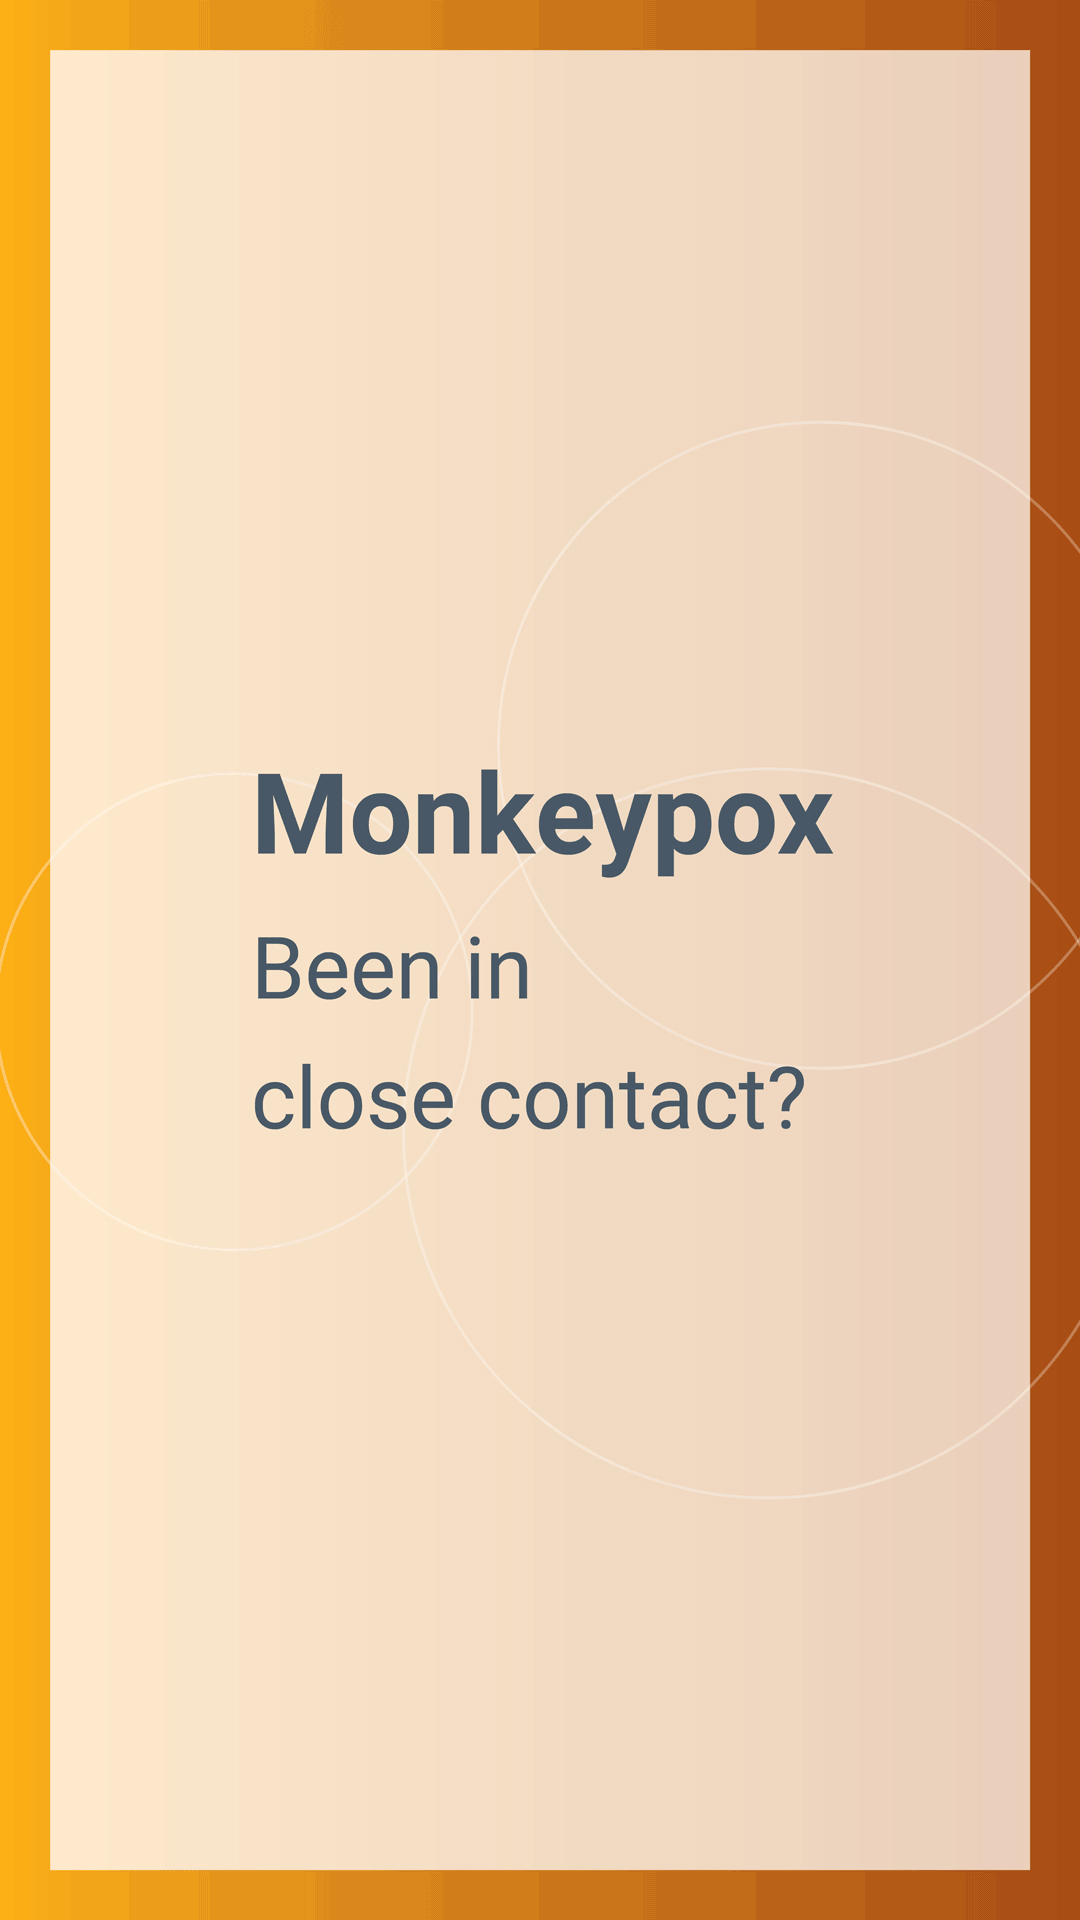 Monkeypox poster: Been in close contact?